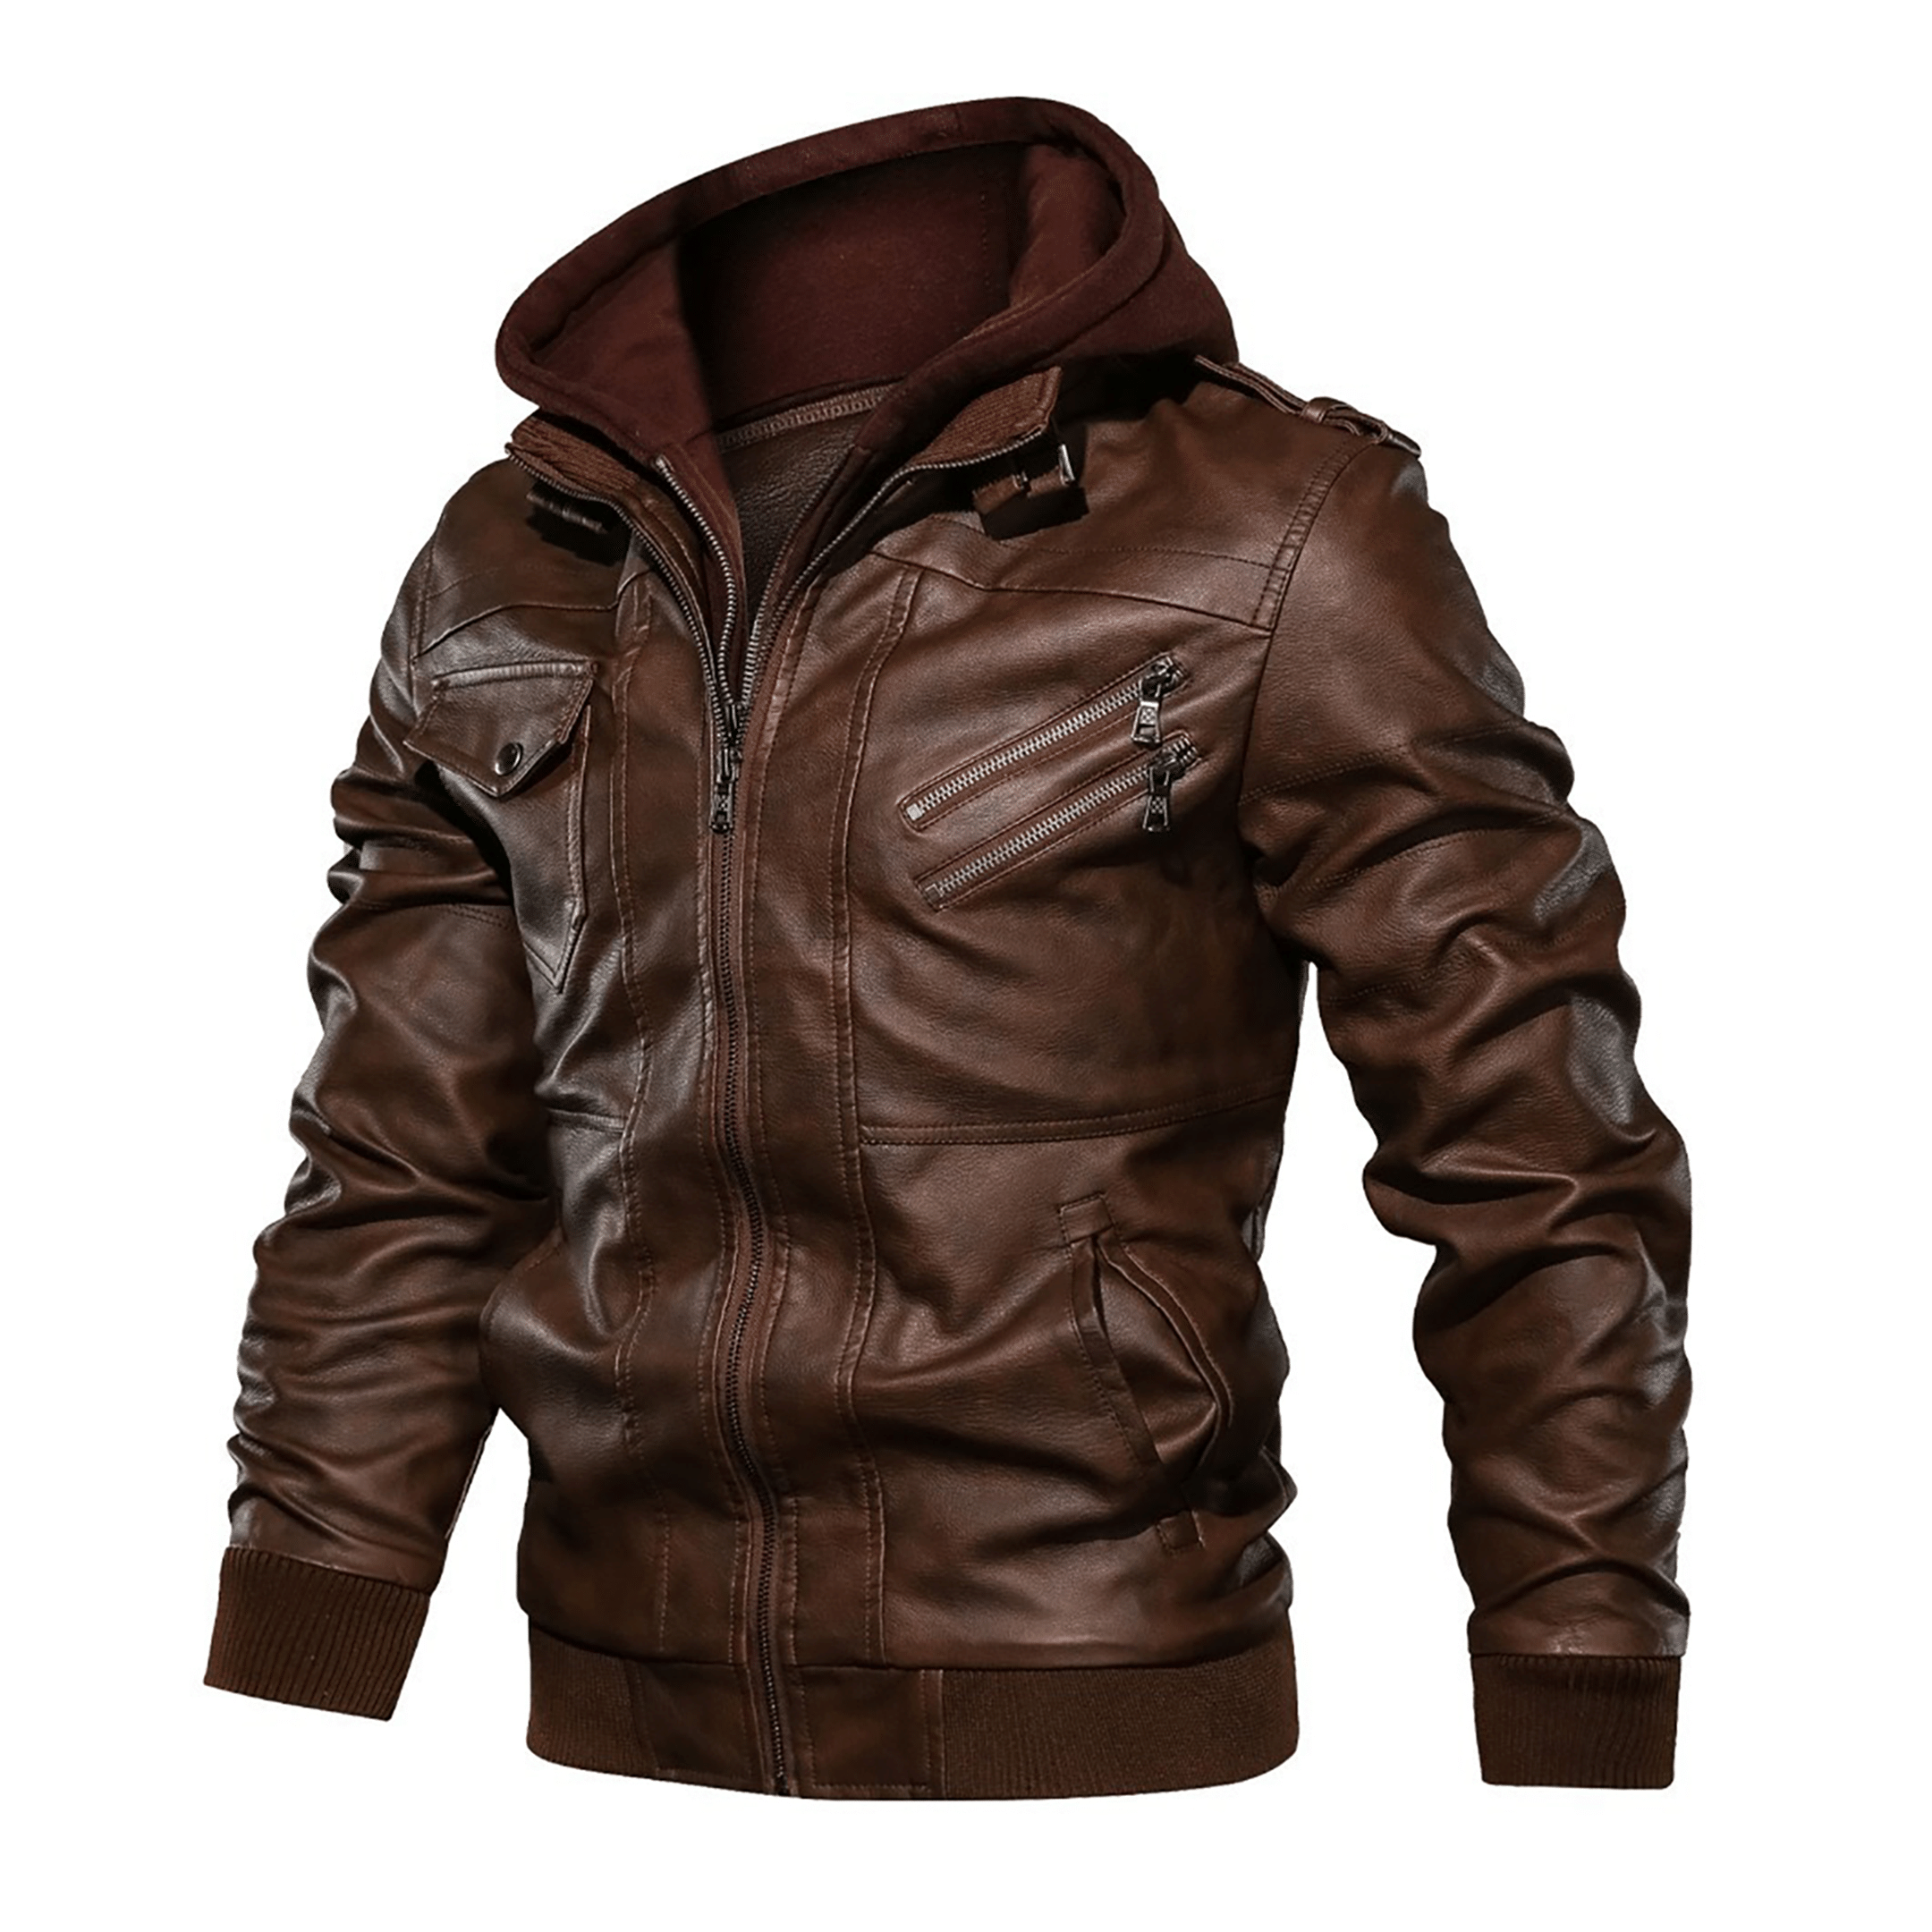 Top leather jackets and latest products 211